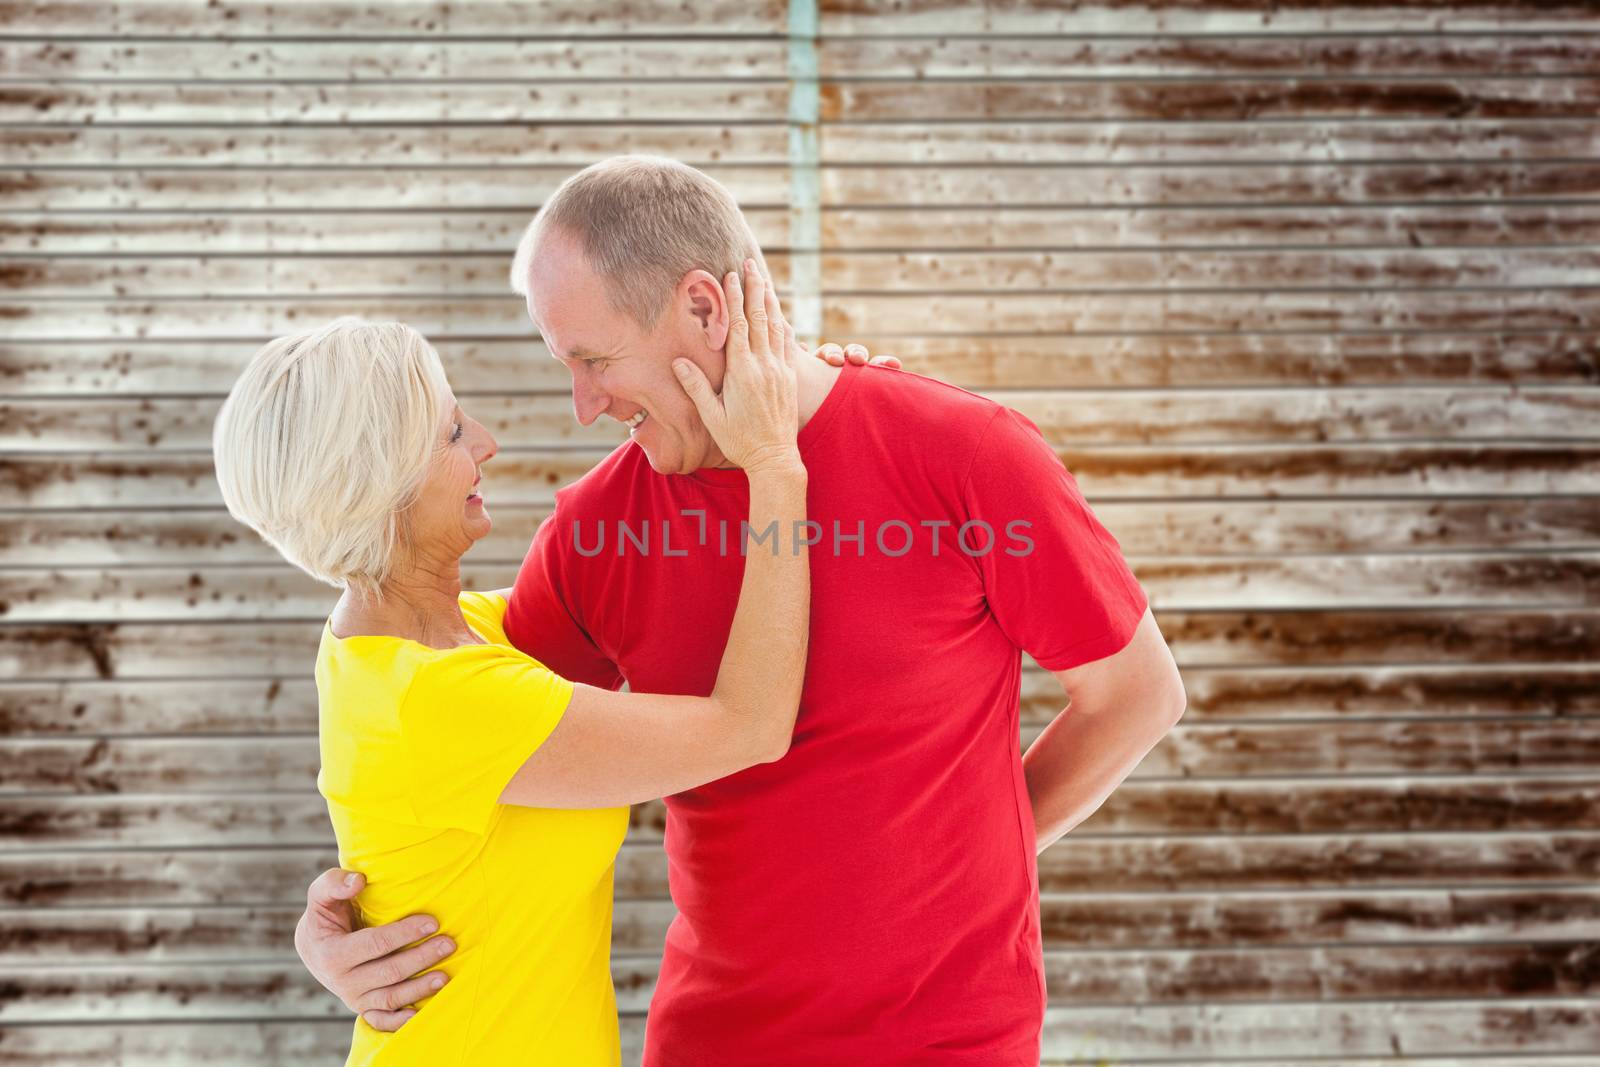 Composite image of happy mature couple hugging and smiling by Wavebreakmedia